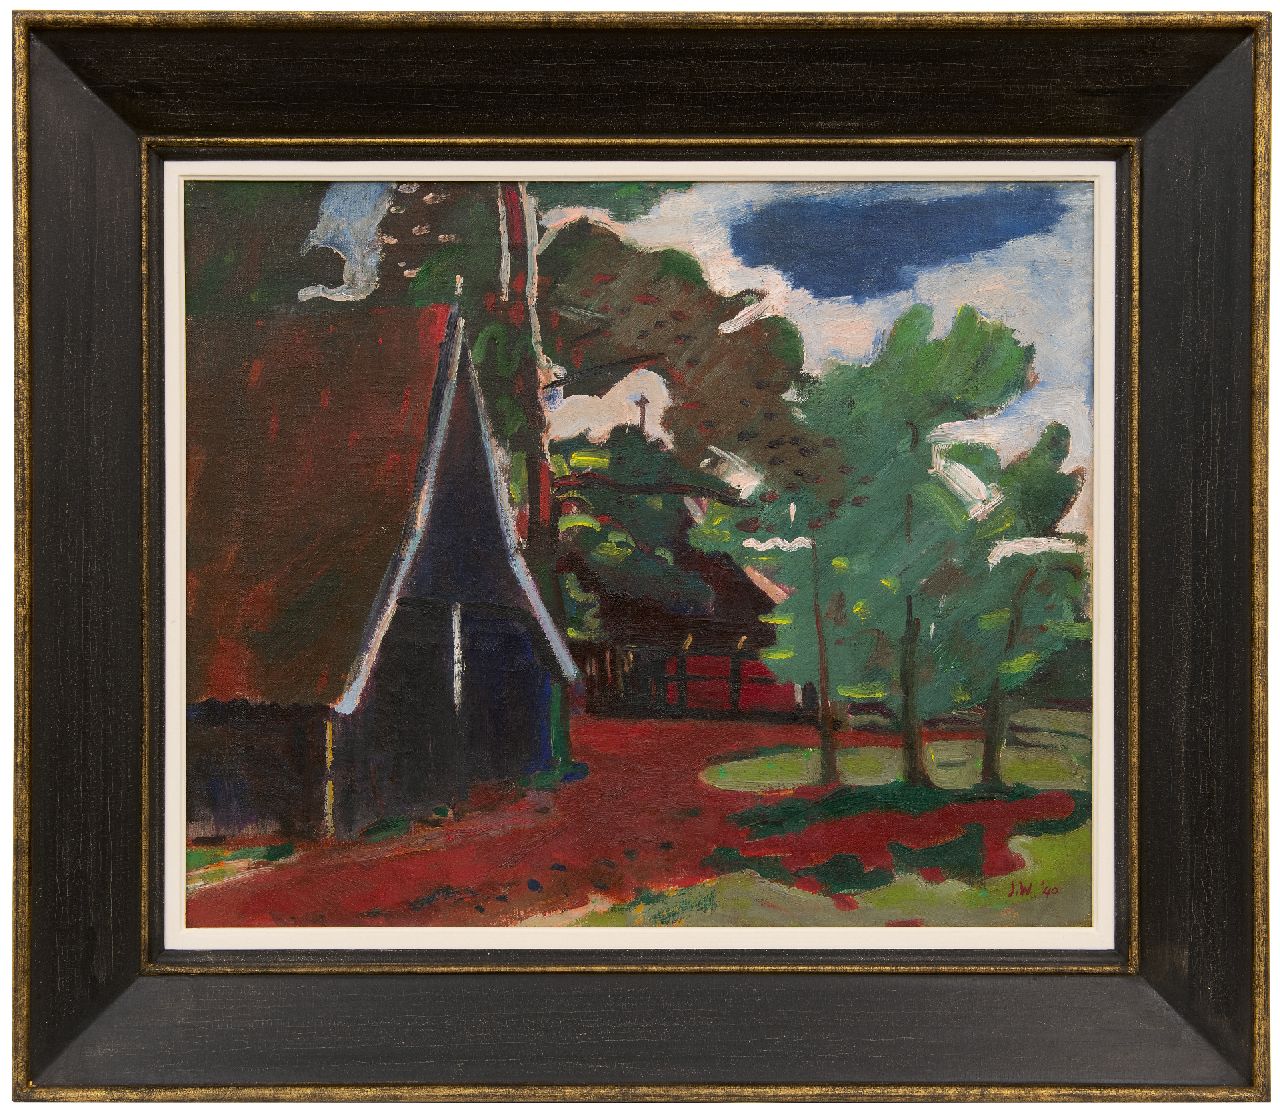 Wiegers J.  | Jan Wiegers | Paintings offered for sale | A farm in Twente, oil on canvas 45.4 x 55.7 cm, signed l.r. with initials and on the stretcher in full and dated '40